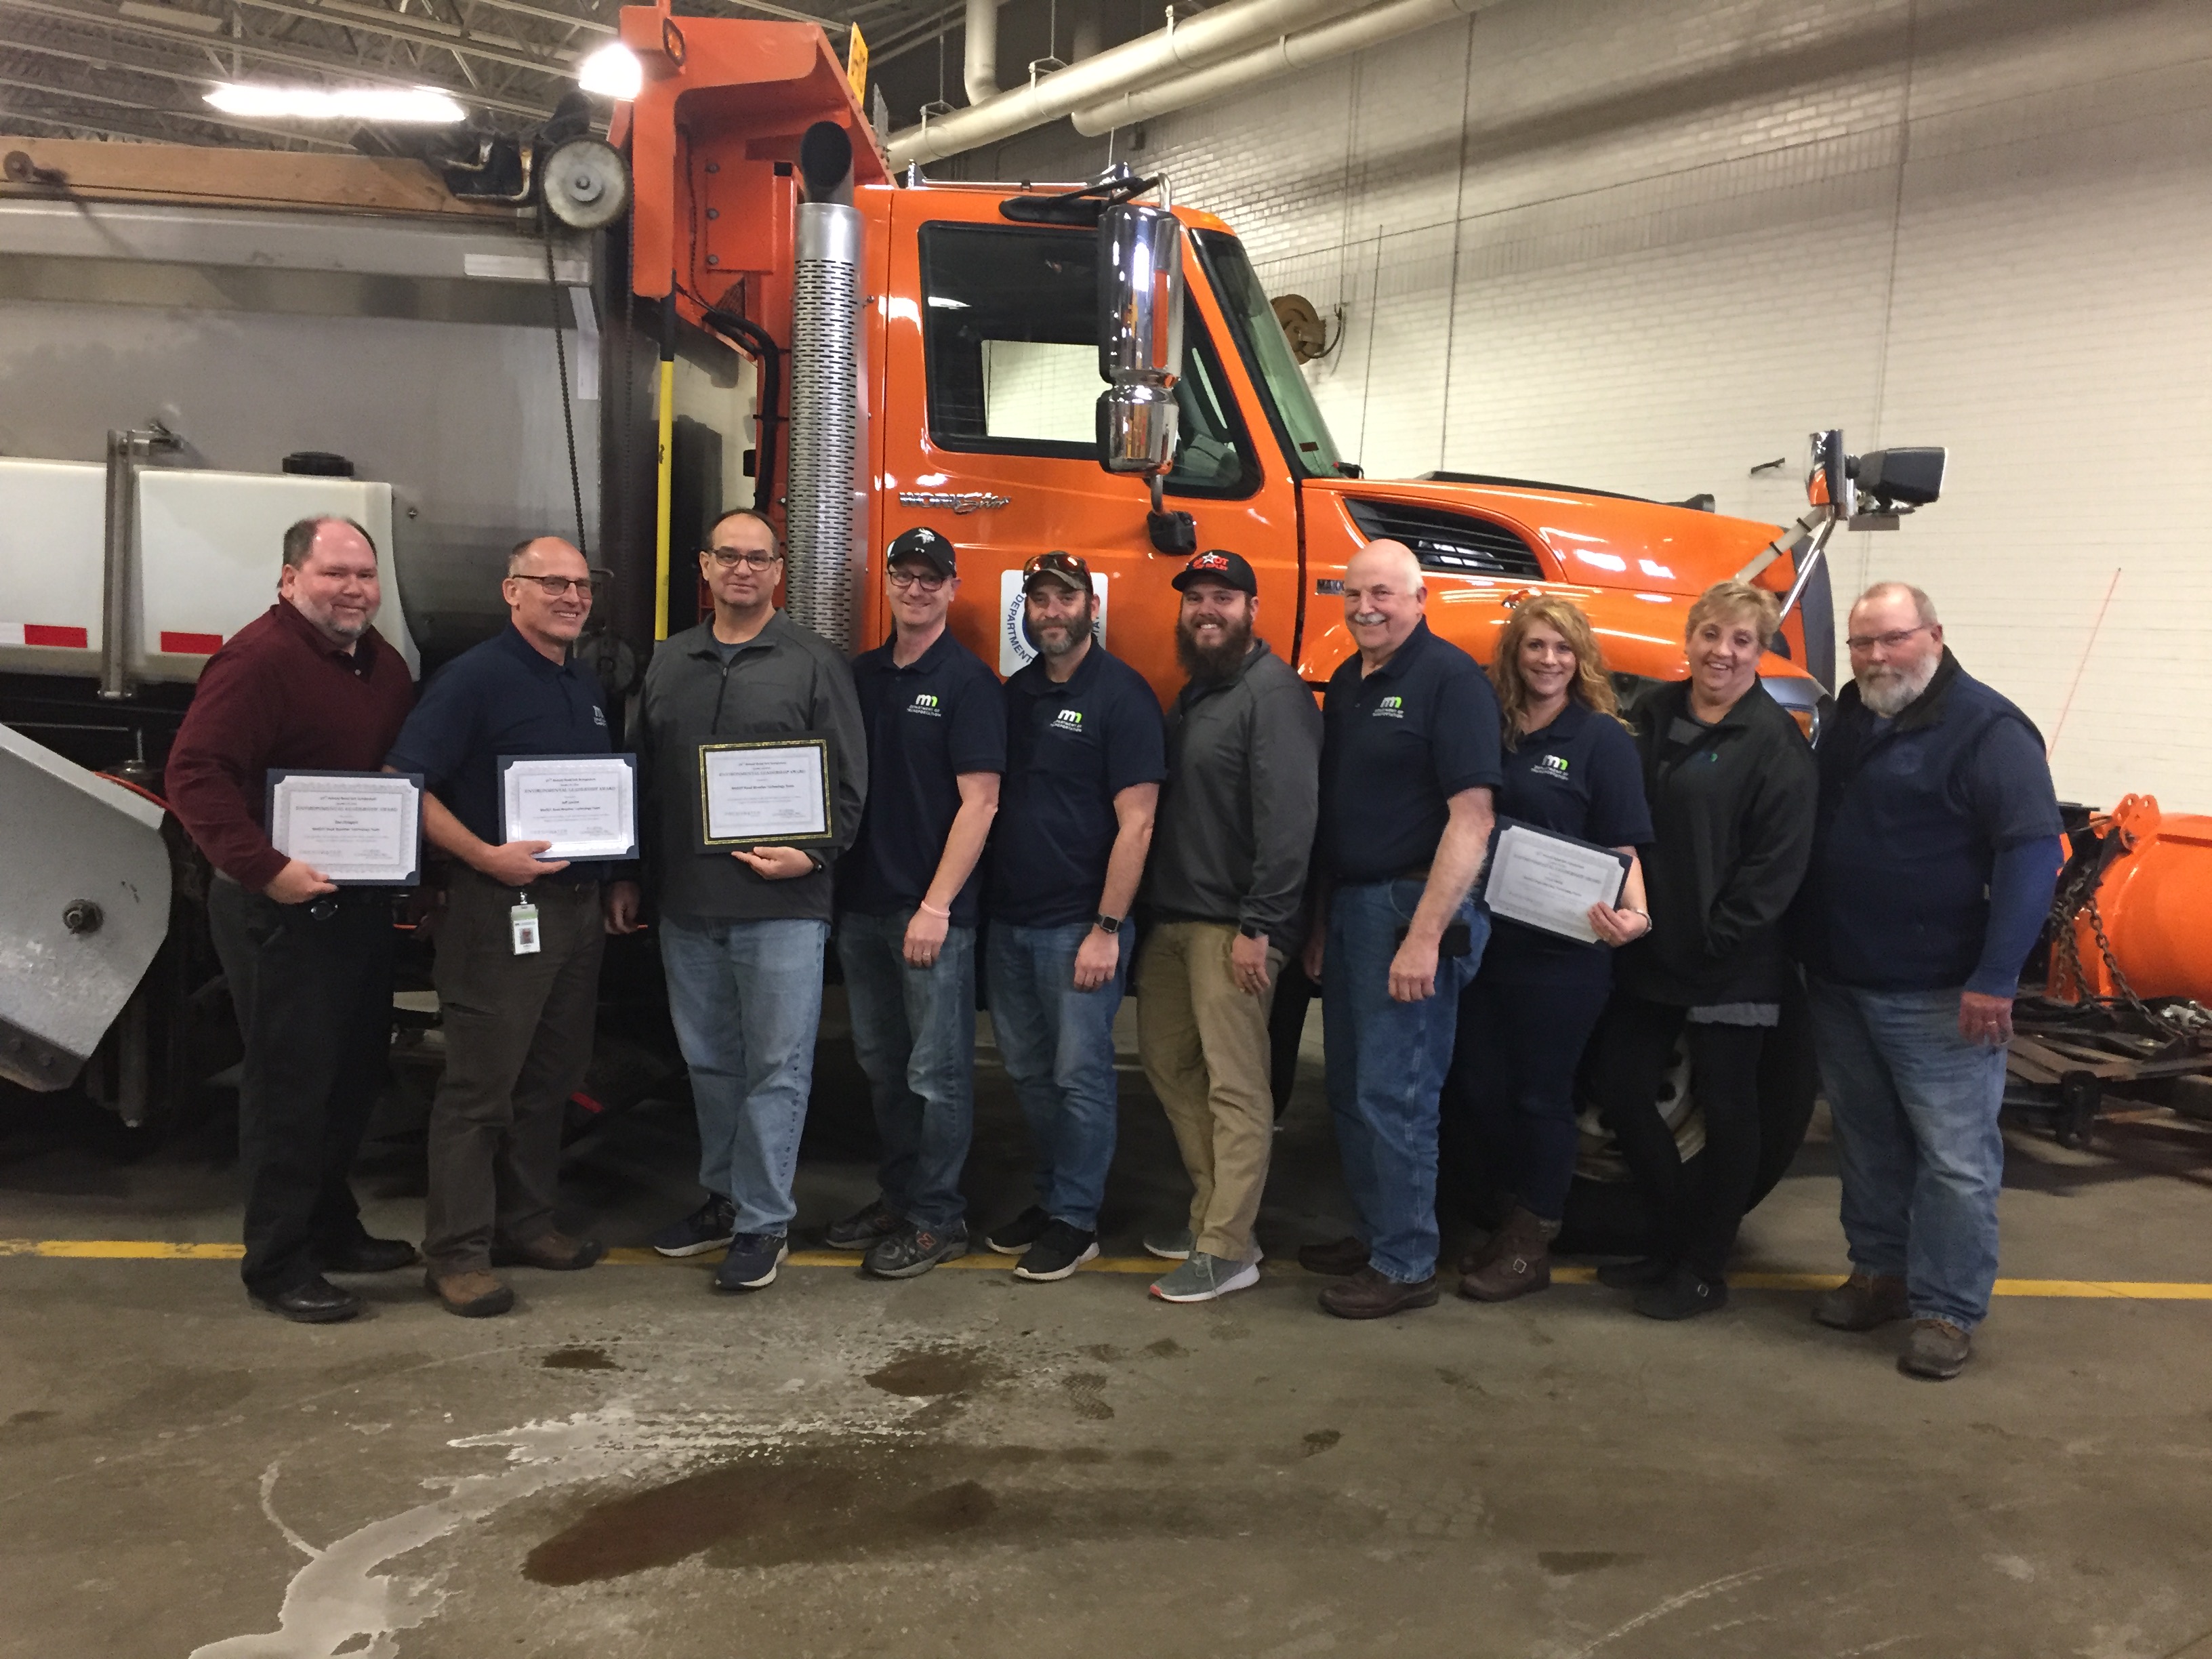 Nine people lined up in front of a plow truck, with four holding certificates